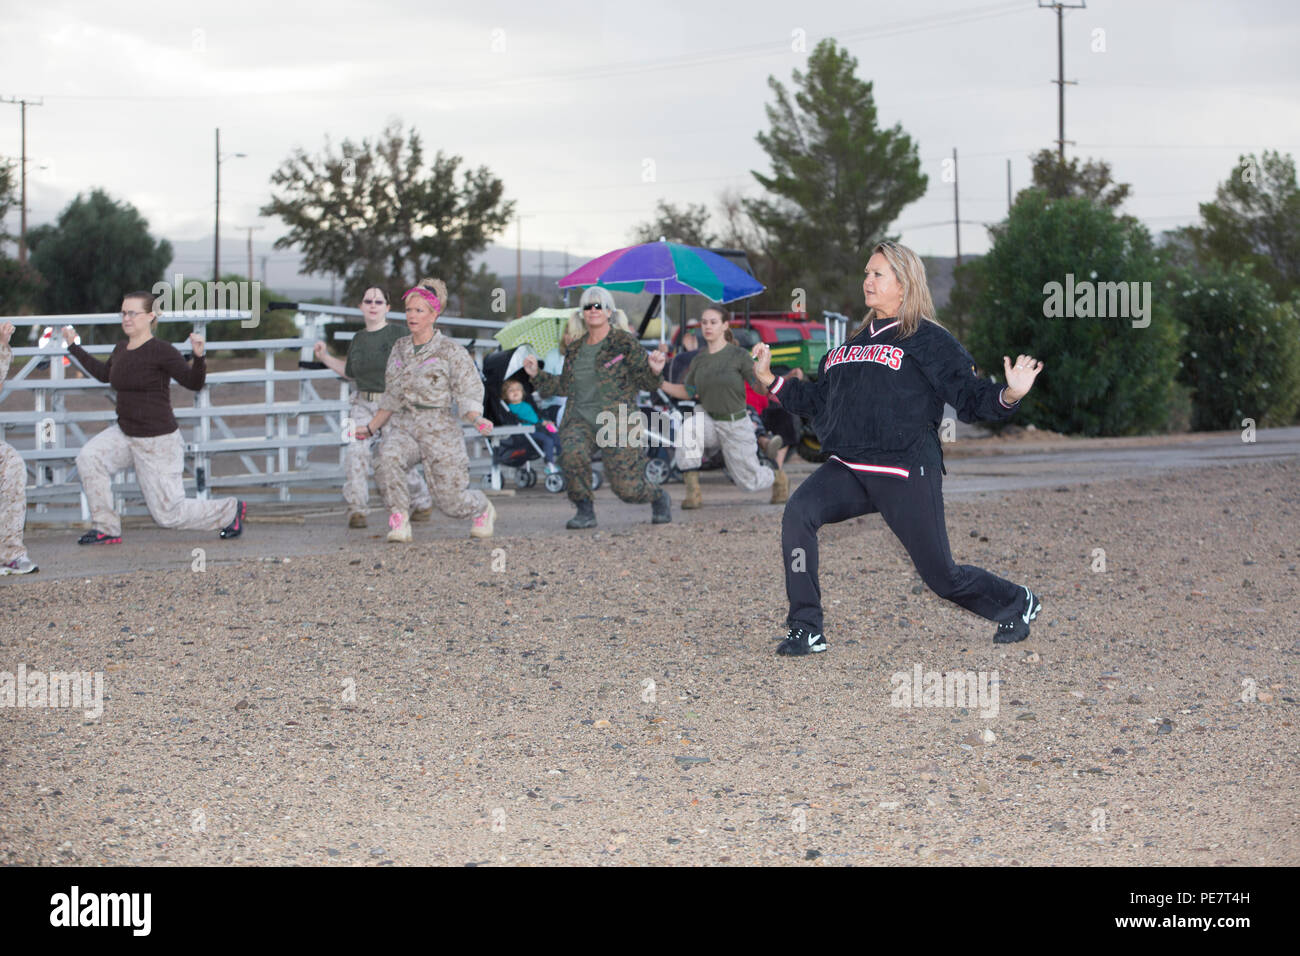 Shelley Lamey, Director of the Semper Fit aboard Marine Corps Logistics Base Barstow, leads a stretching and warm up routine before the obstacle course portion of Jane Wayne Day aboard the installation, Oct. 15.  The event included activities at the base obstacle course, rifle range, and maintenance facilities. Stock Photo